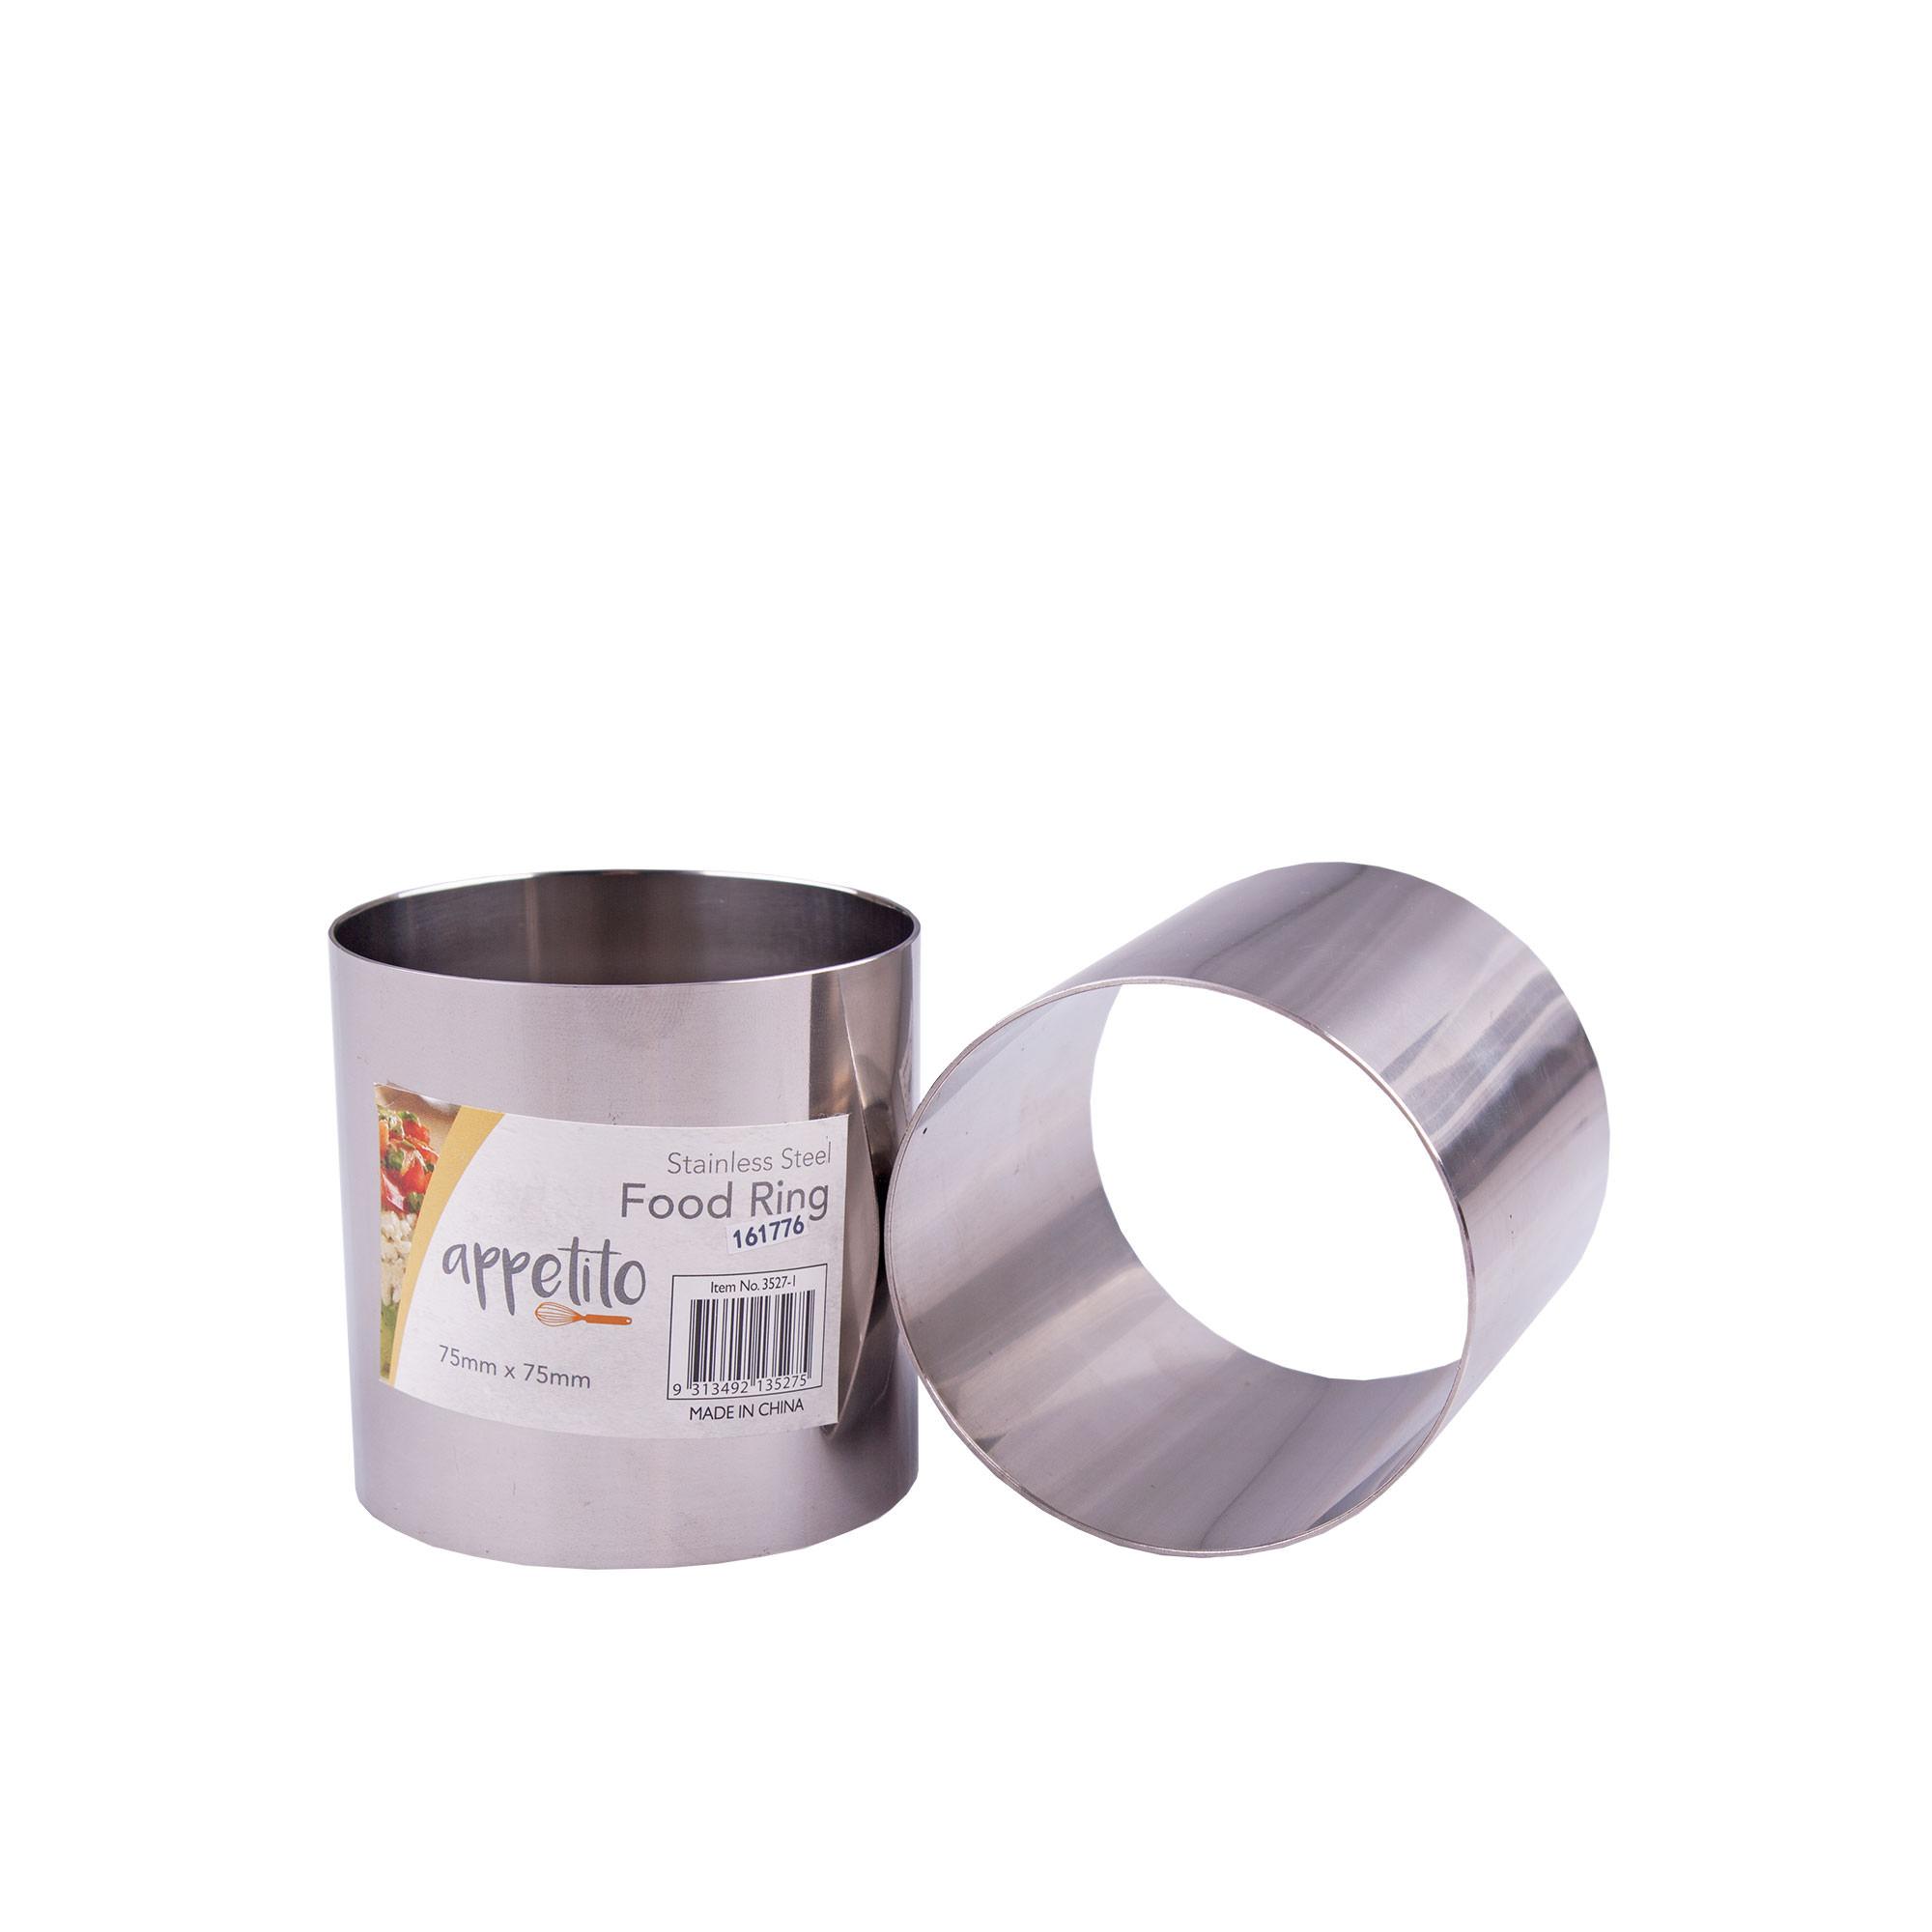 Appetito Stainless Steel Food Ring 7.5cm Image 1